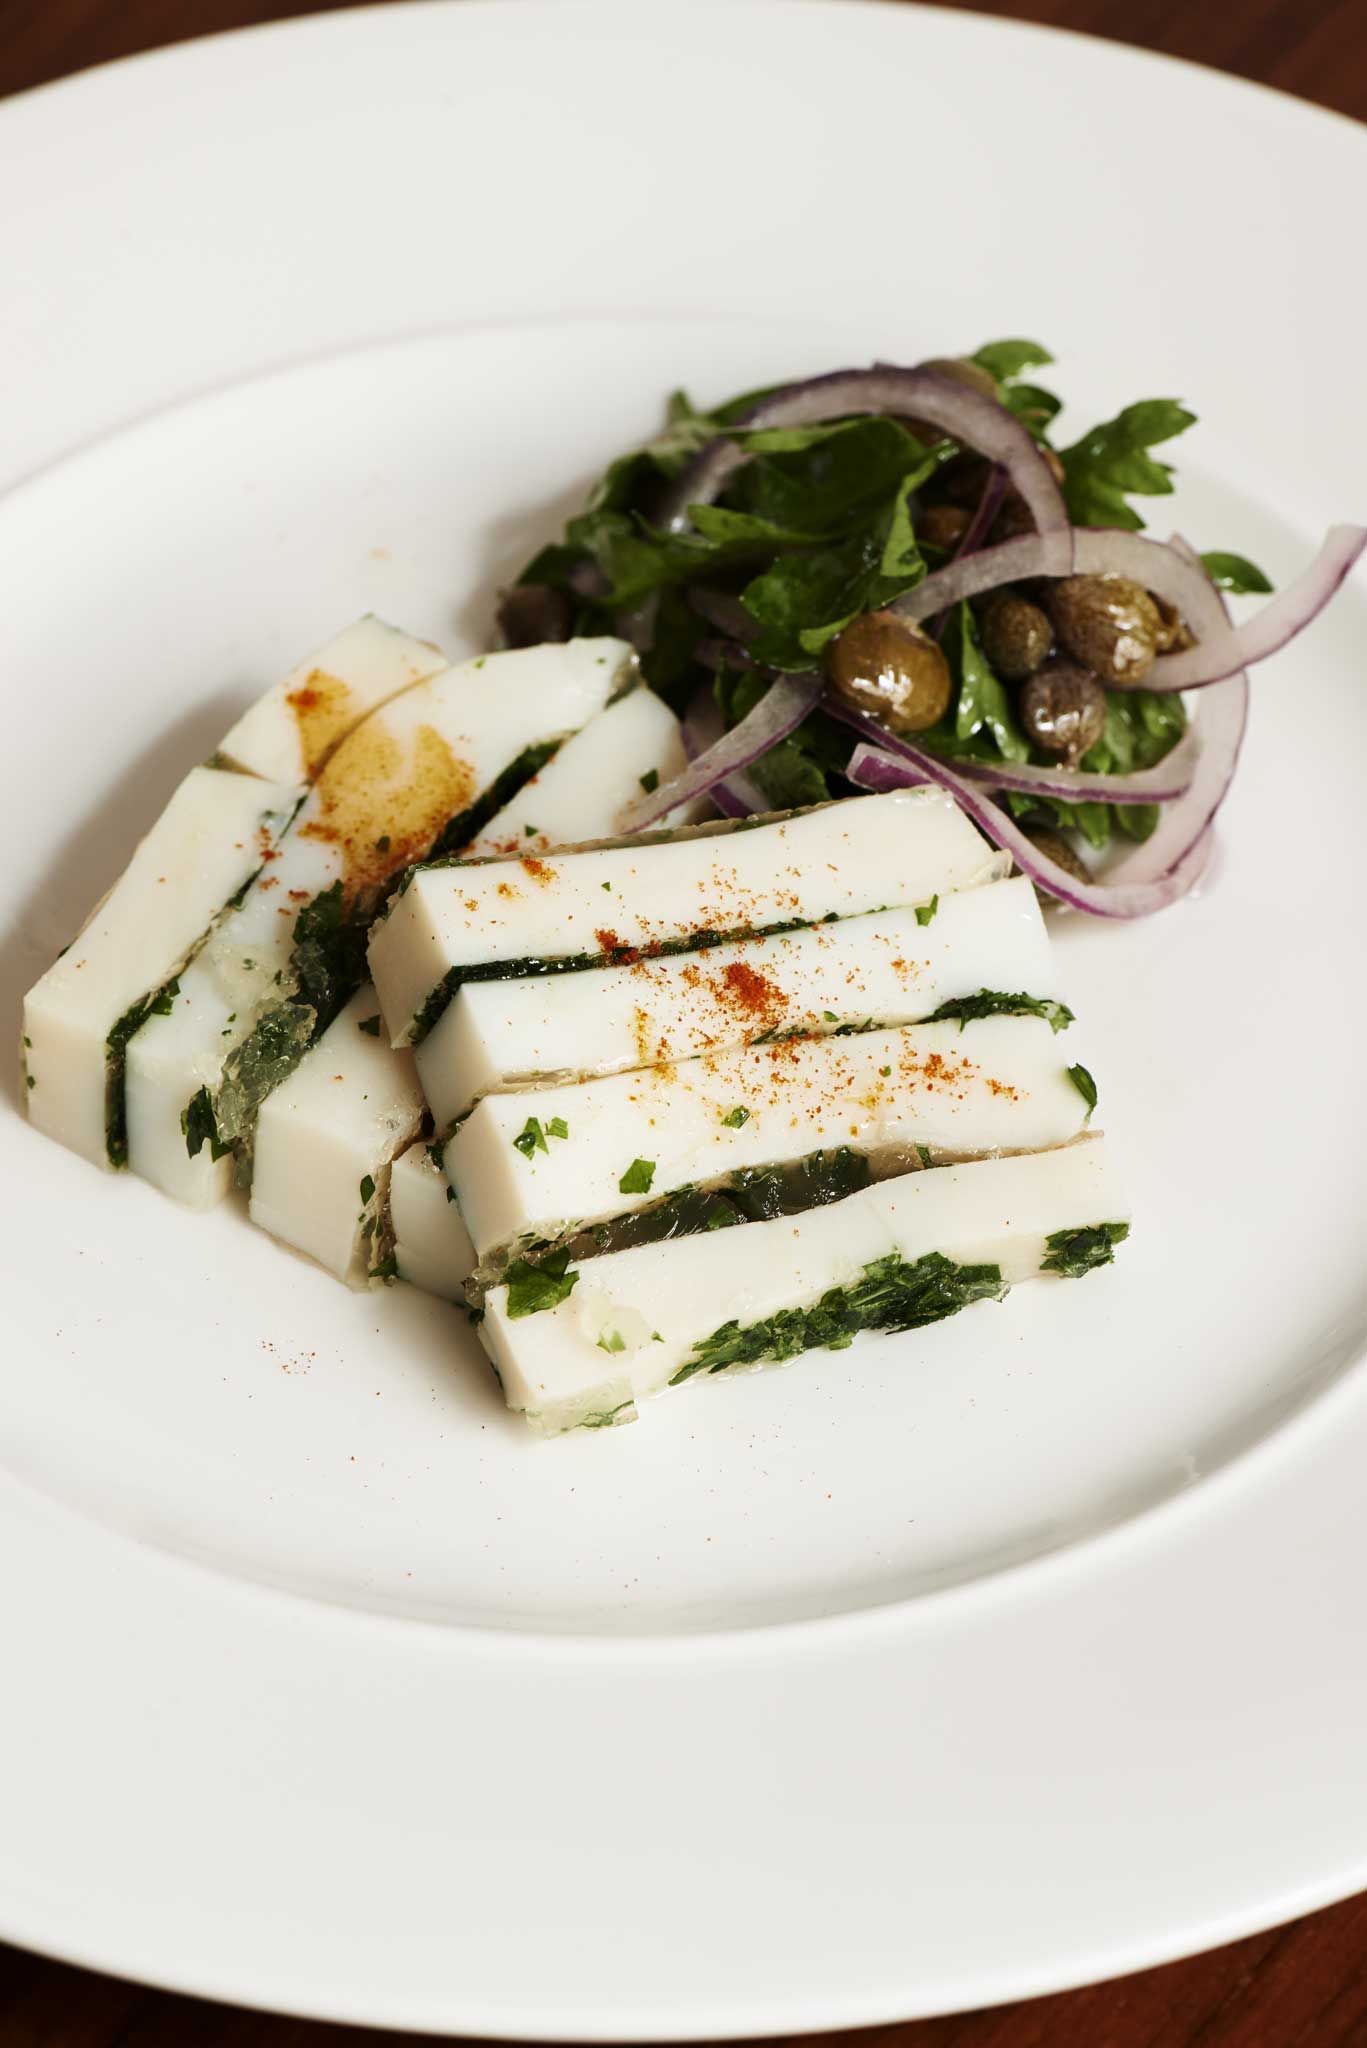 Pressed cuttlefish with parsley salad